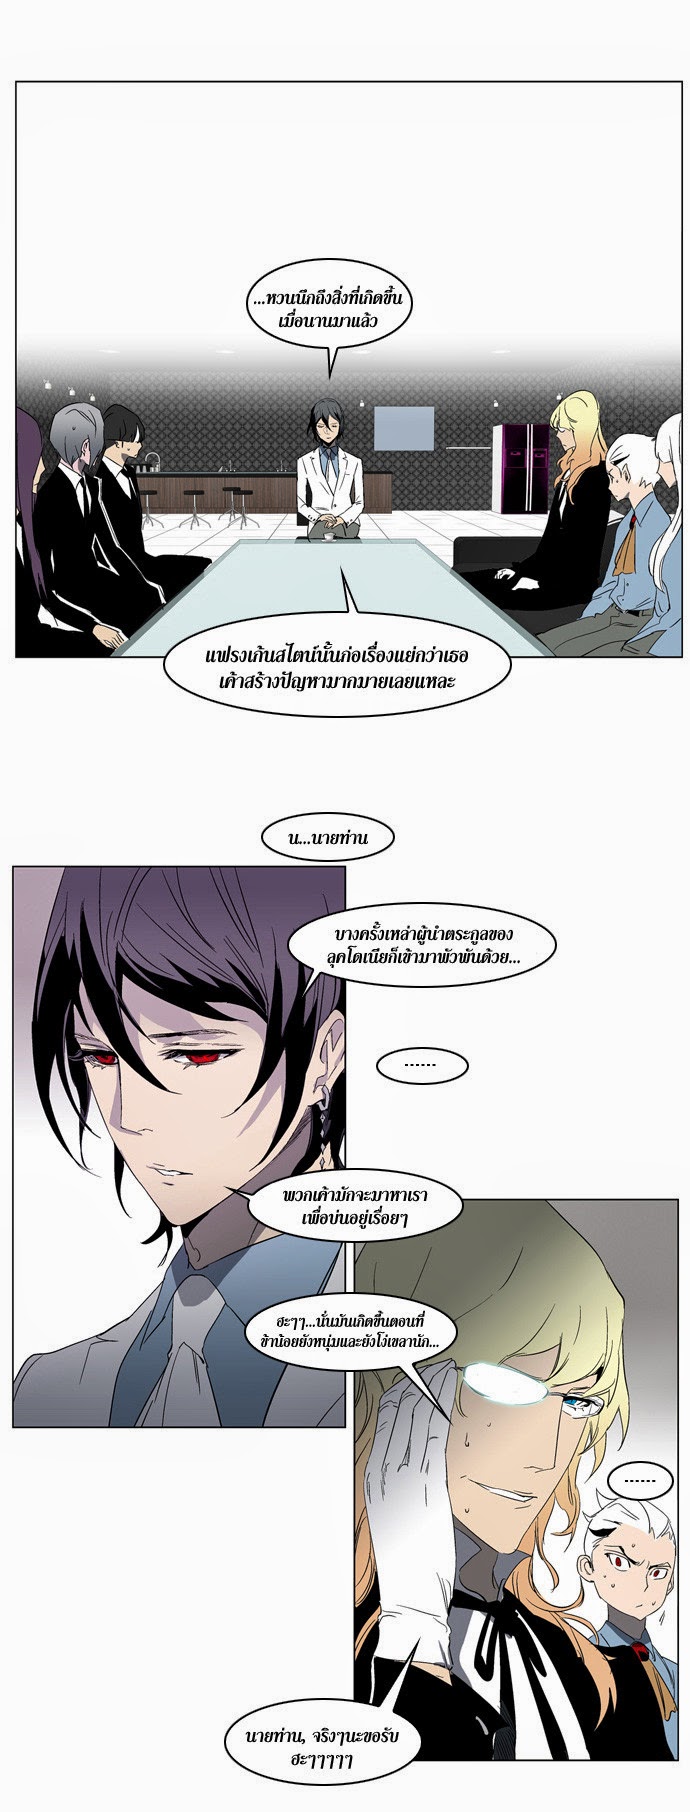 Noblesse 214 017